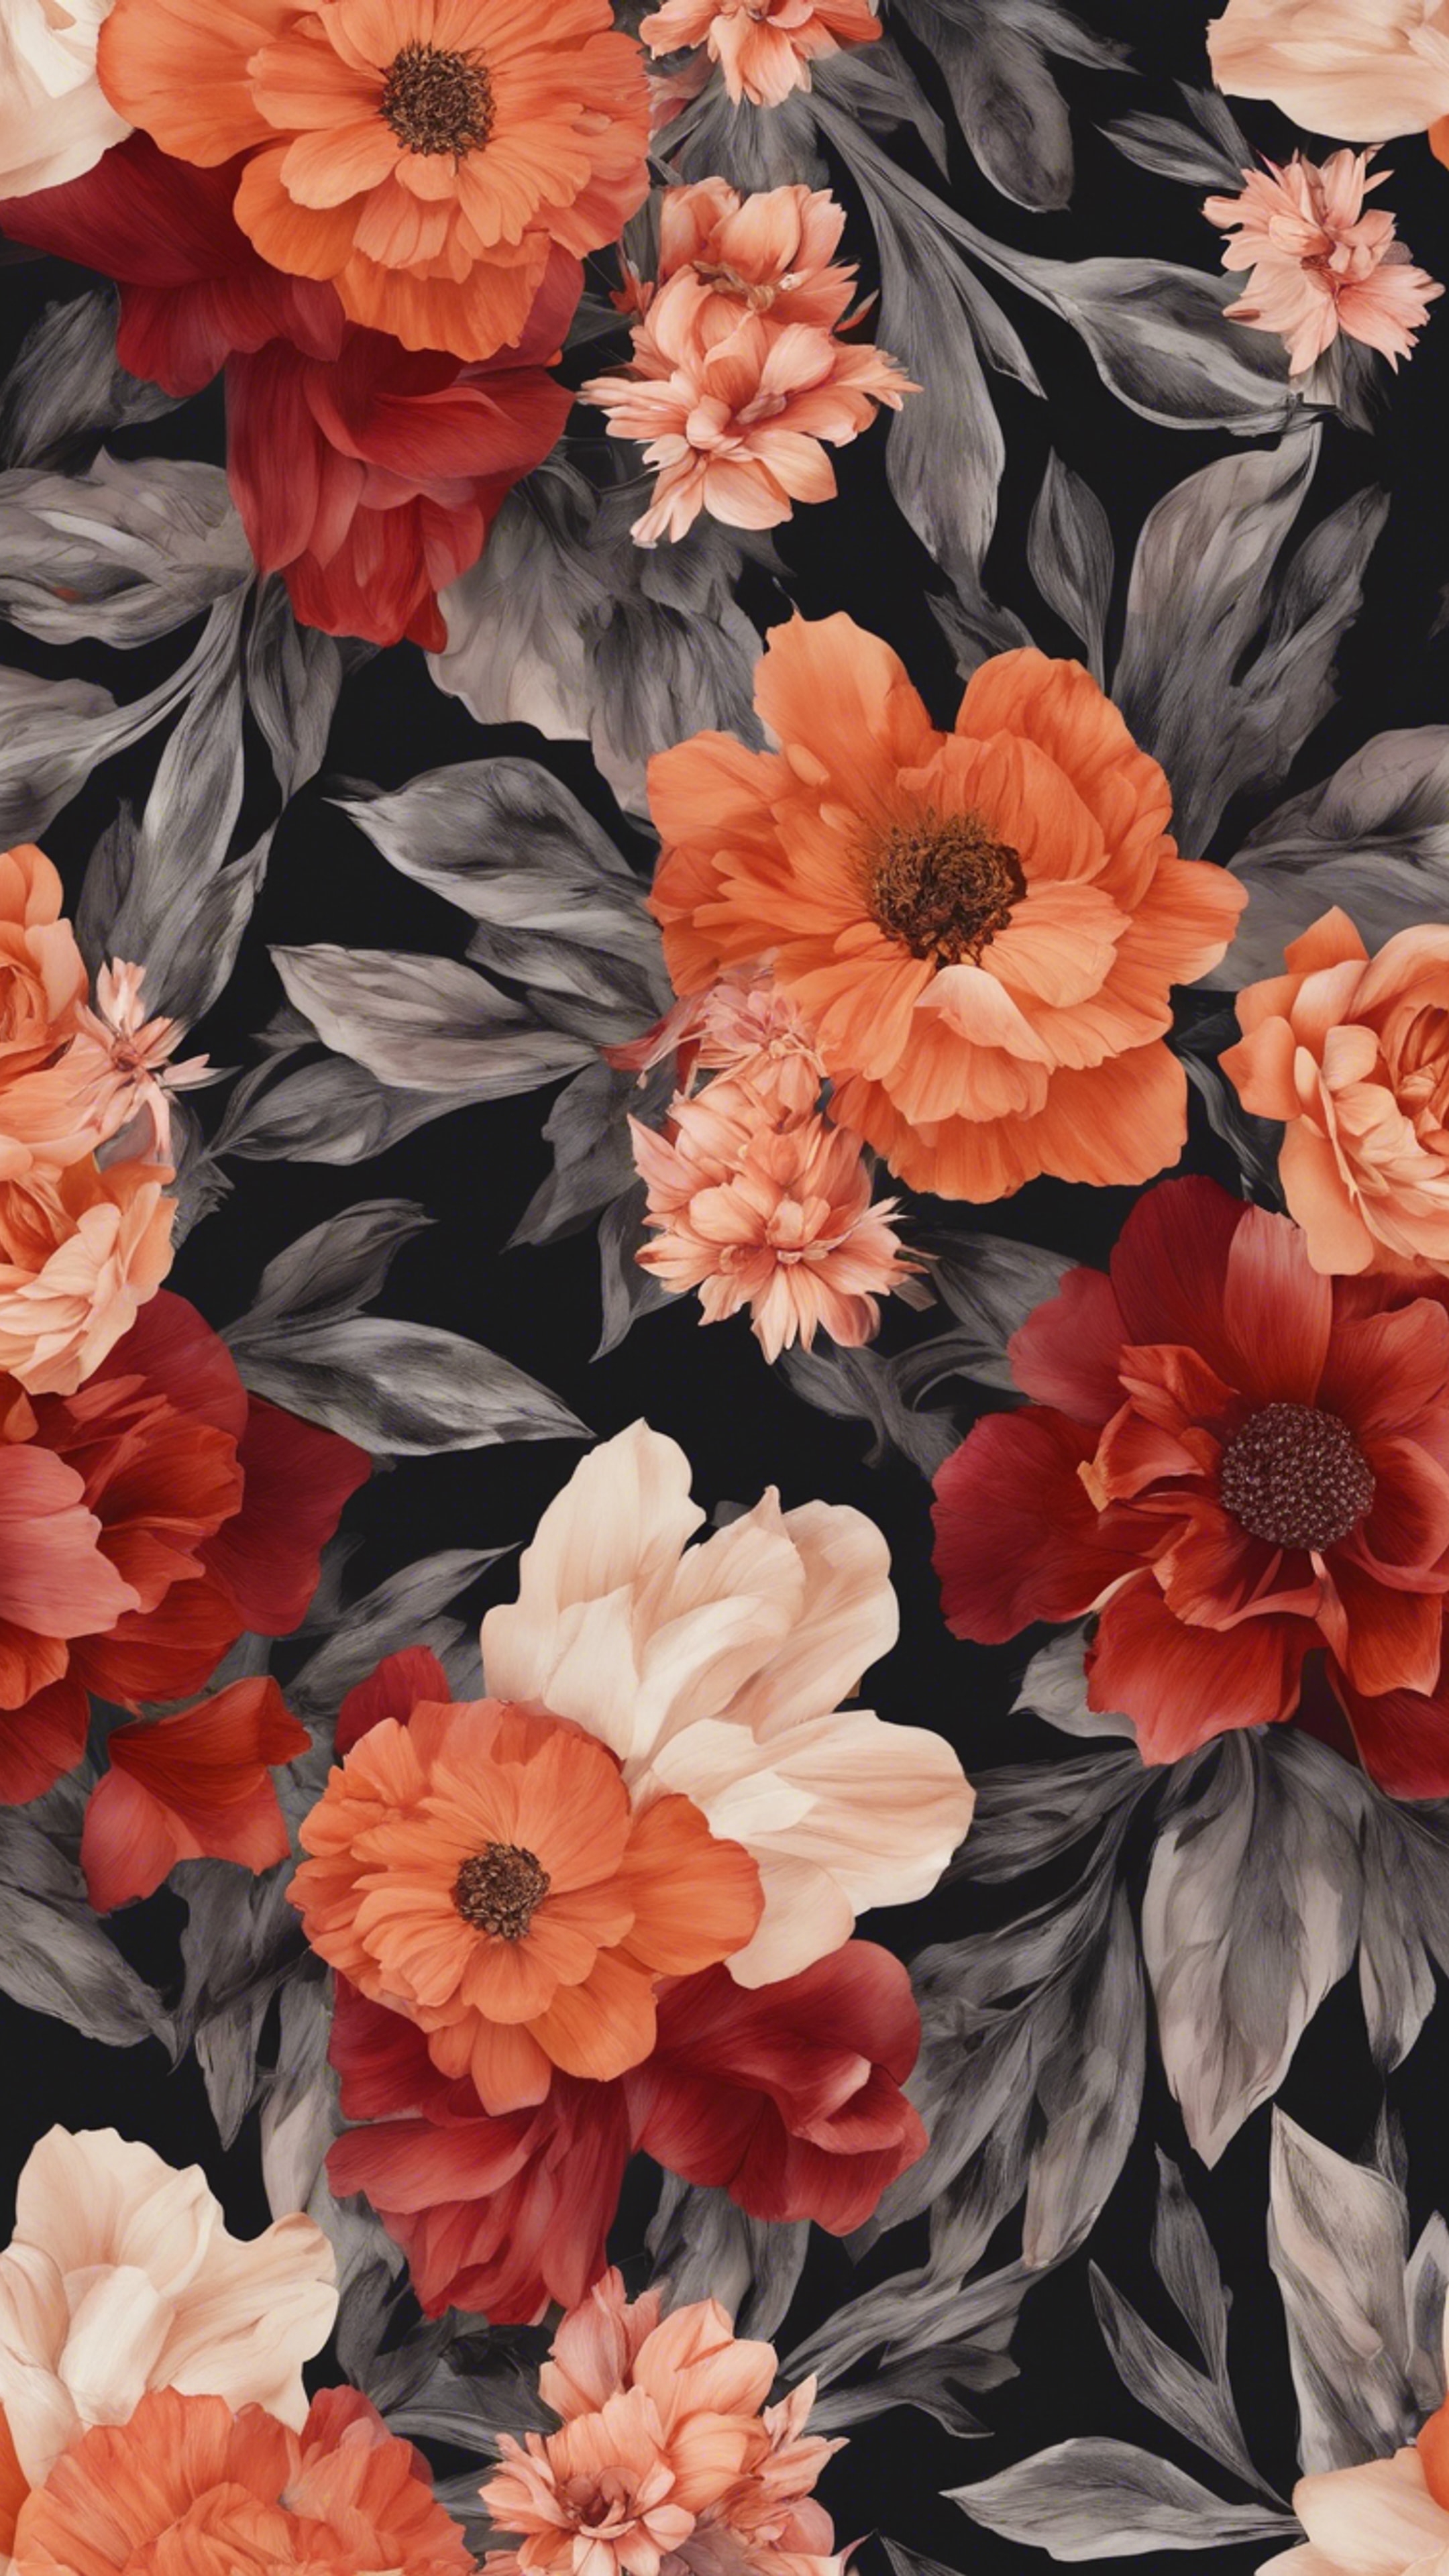 Seamless floral pattern with red and orange flowers that have a gradient effect. Tapeta[2b8b1301f068420e9b5a]